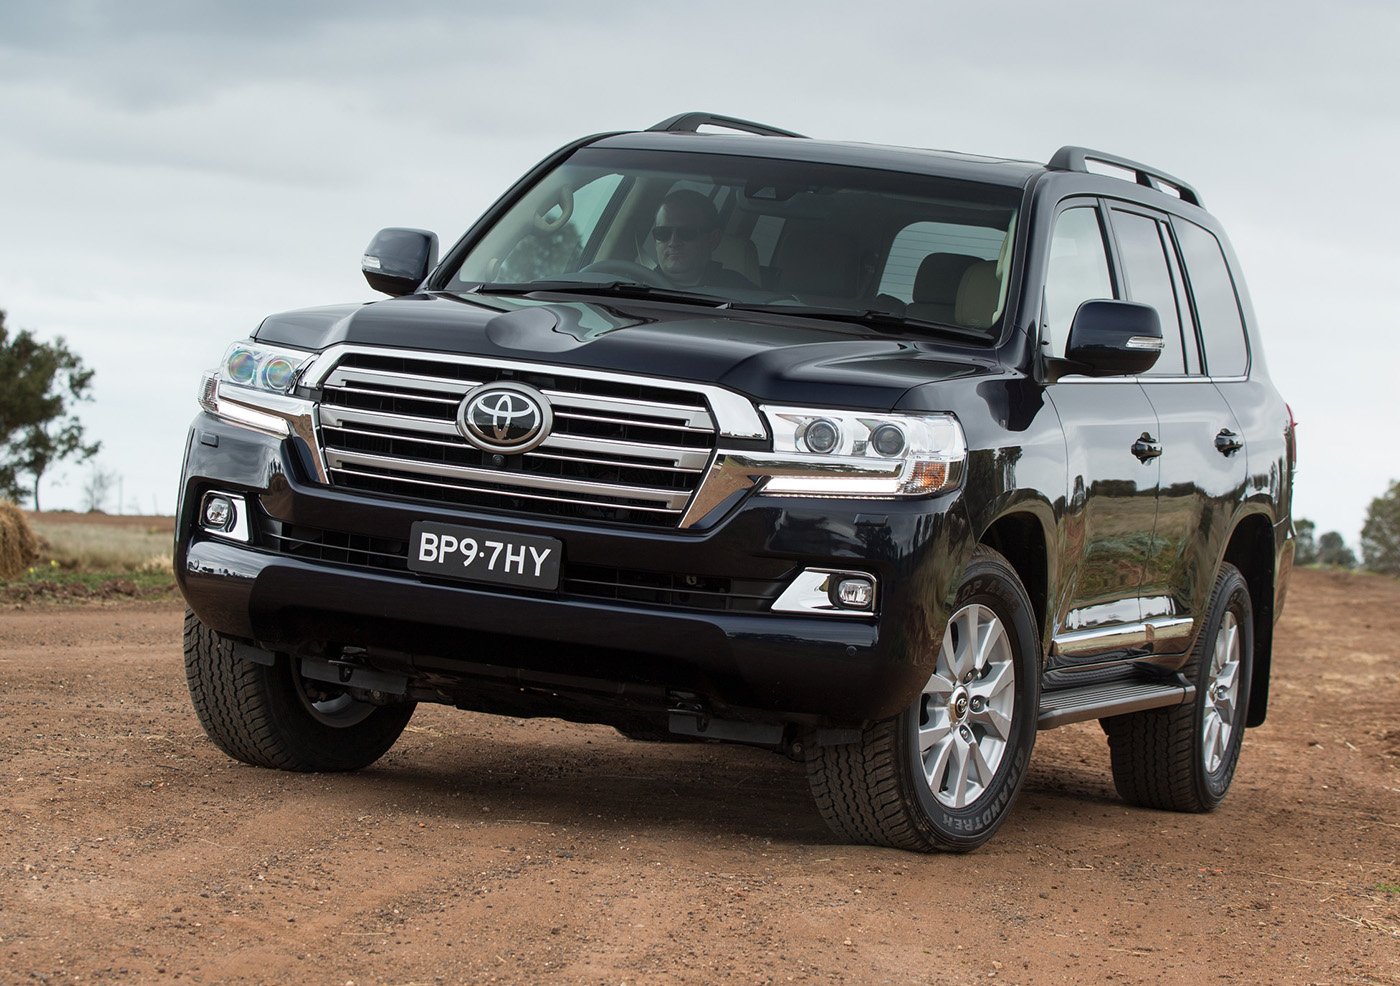 2016 Toyota LandCruiser 200 Series revealed, October launch confirmed ...